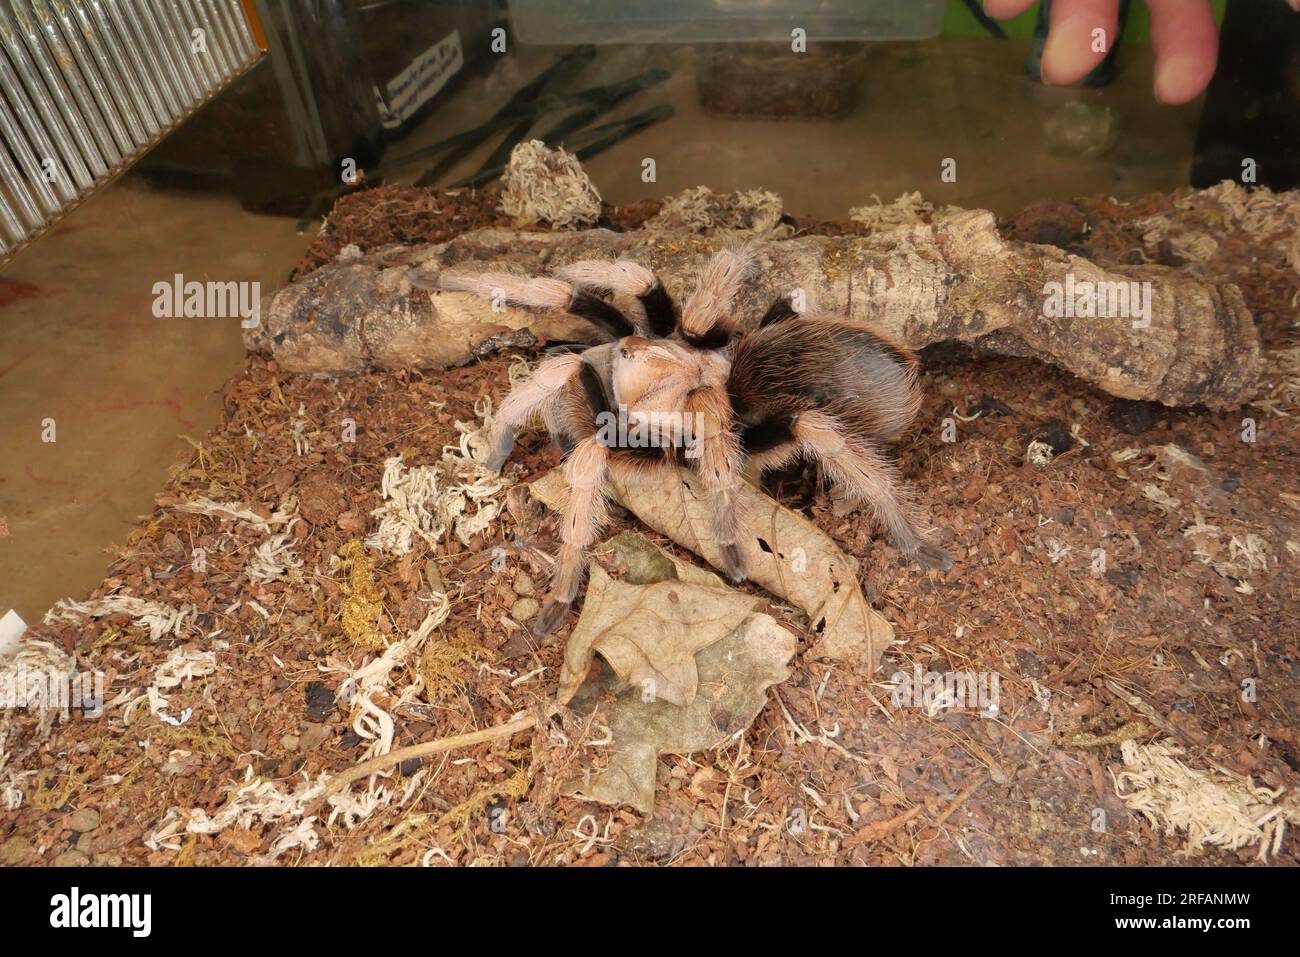 Derby Quad Insects Spiders Creepy Crawlies -  Goliath birdeater (Theraphosa blondi) which belongs to the tarantula family. Stock Photo